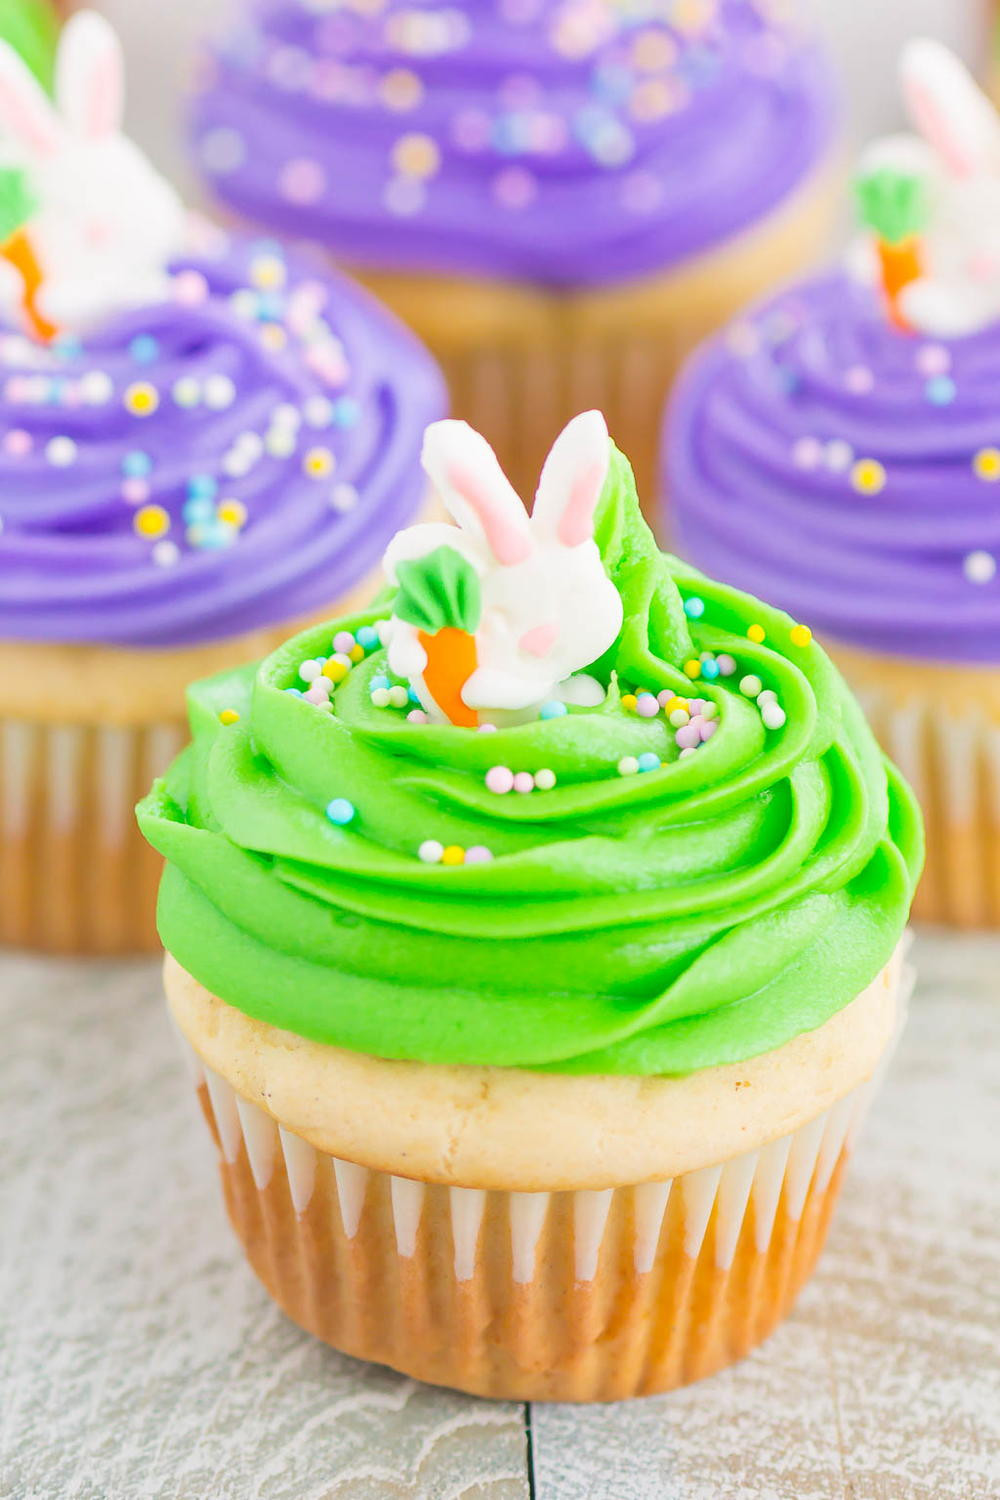 Top 15 Most Shared Easter Bunny Cupcakes